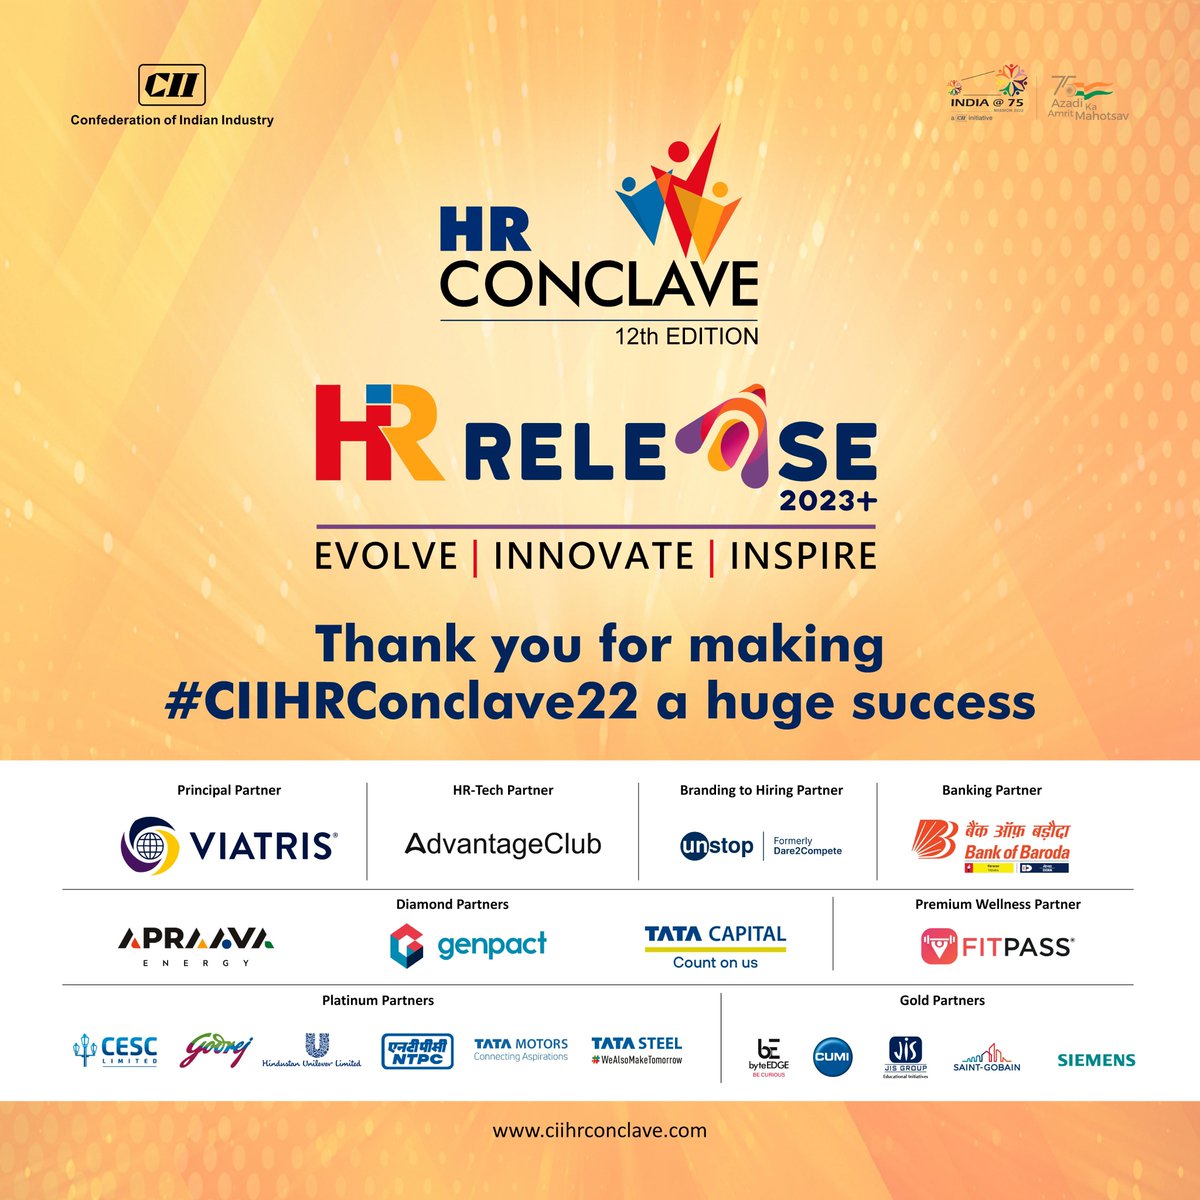 A big shout-out to all attendees, speakers, partner organizations, organizing committee and everyone involved for making 12th CII HR Conclave a huge success. Thank you for all the support we received.

#CIIHRConclave22 #culture #hr #people #chro #hrconference #peopleandculture